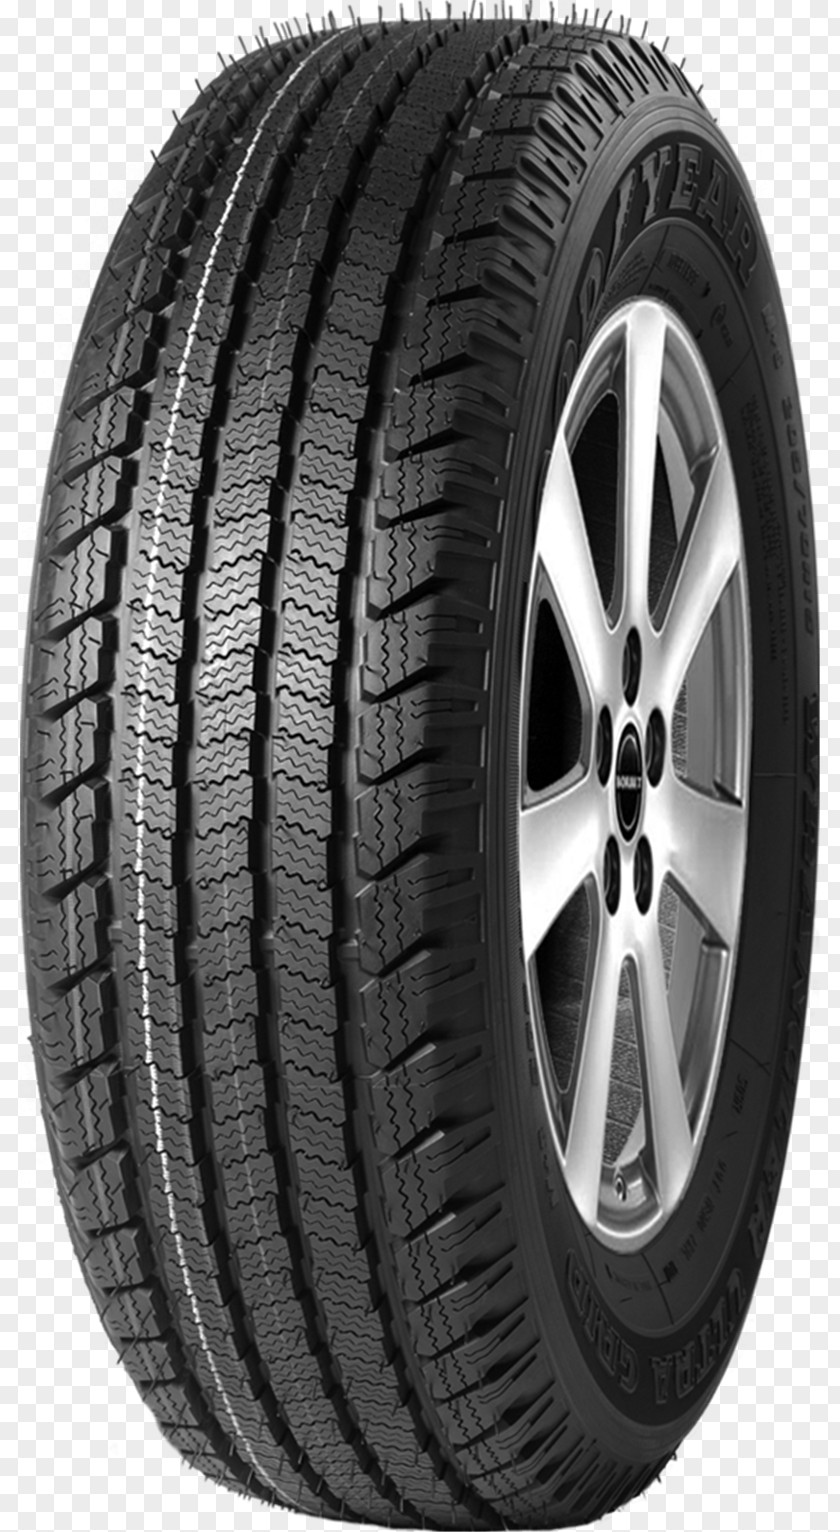 Car Radial Tire Pirelli Continental AG PNG